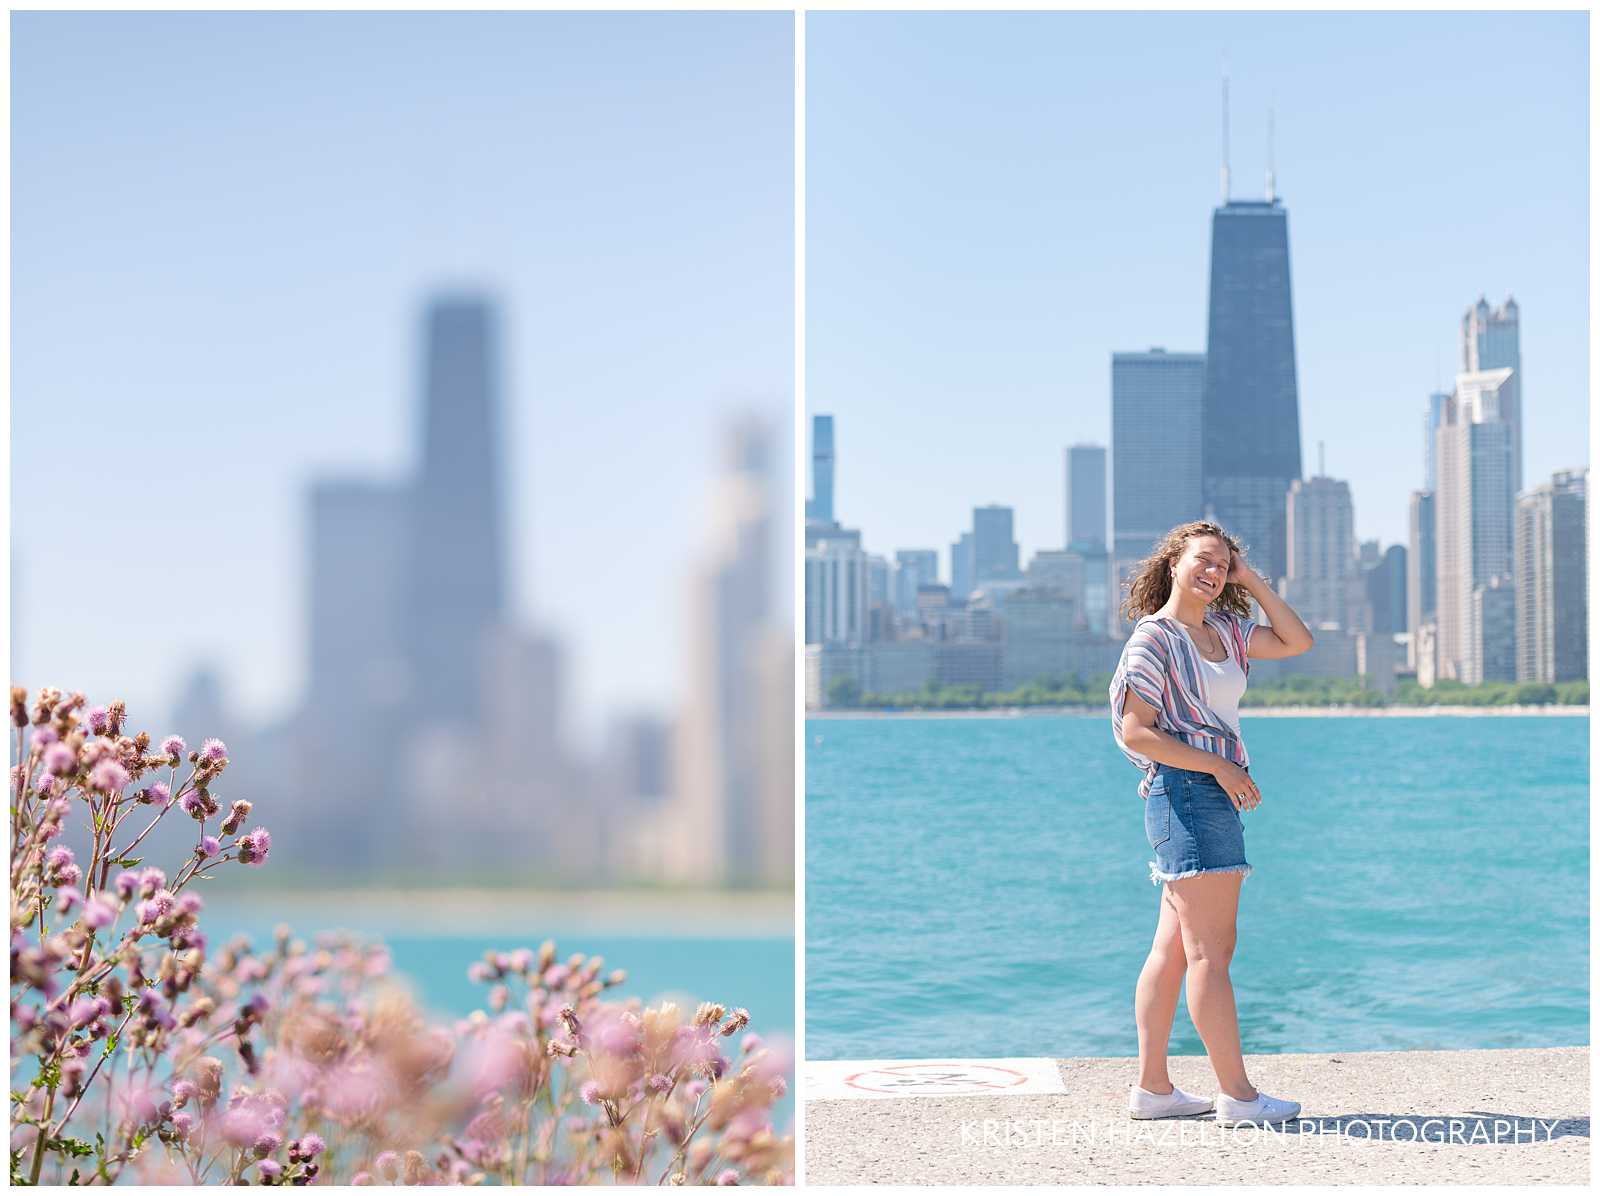 High school senior portraits with the Chicago skyline and purple flowers